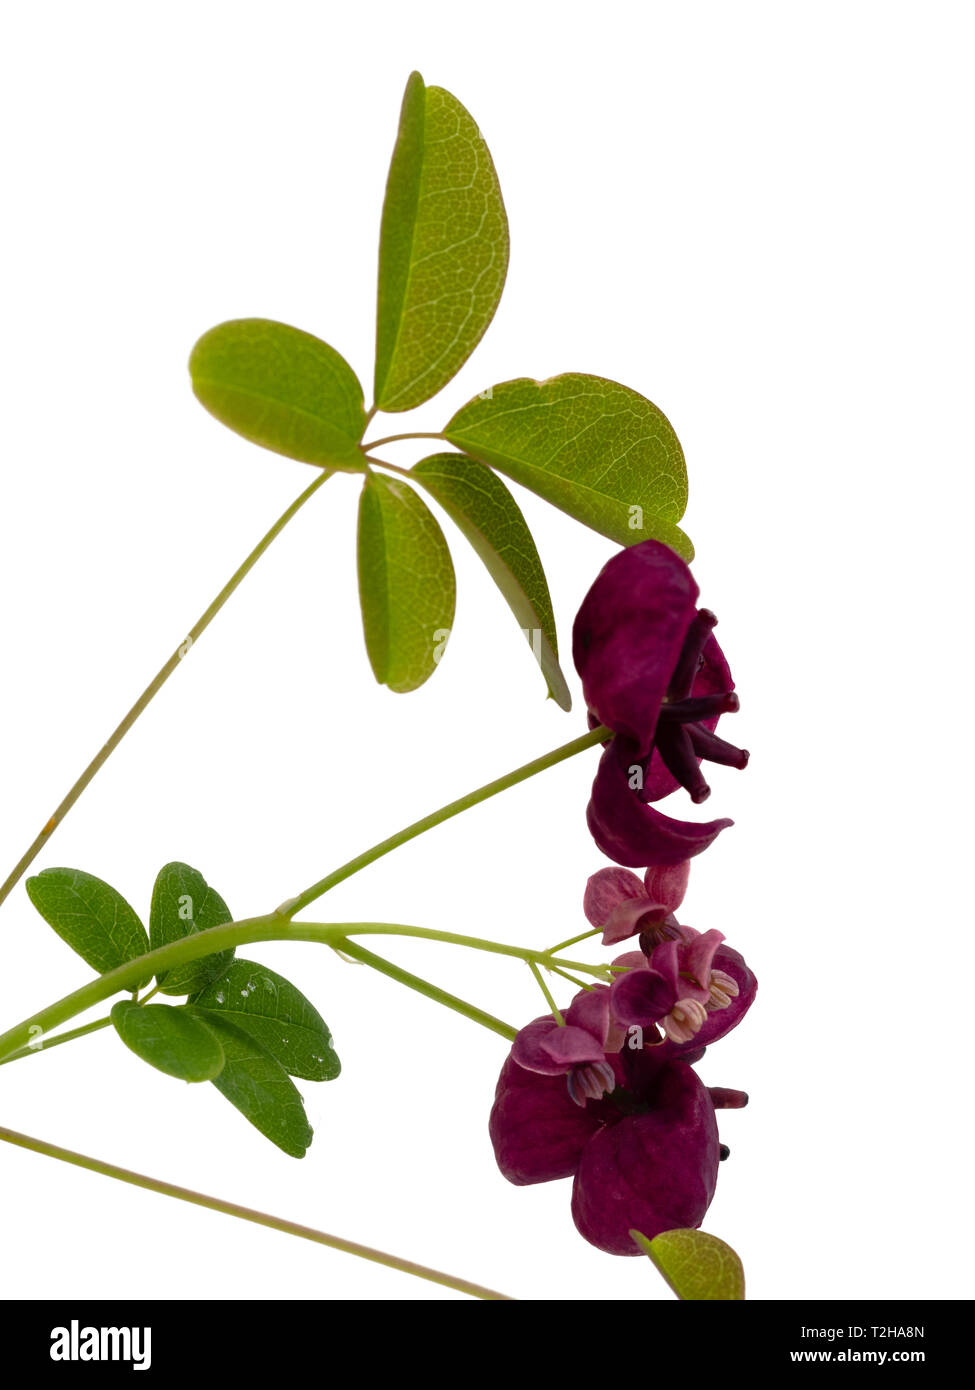 Small male and large female flowers of the chocolate vine, Akebia quinata, on a white background Stock Photo